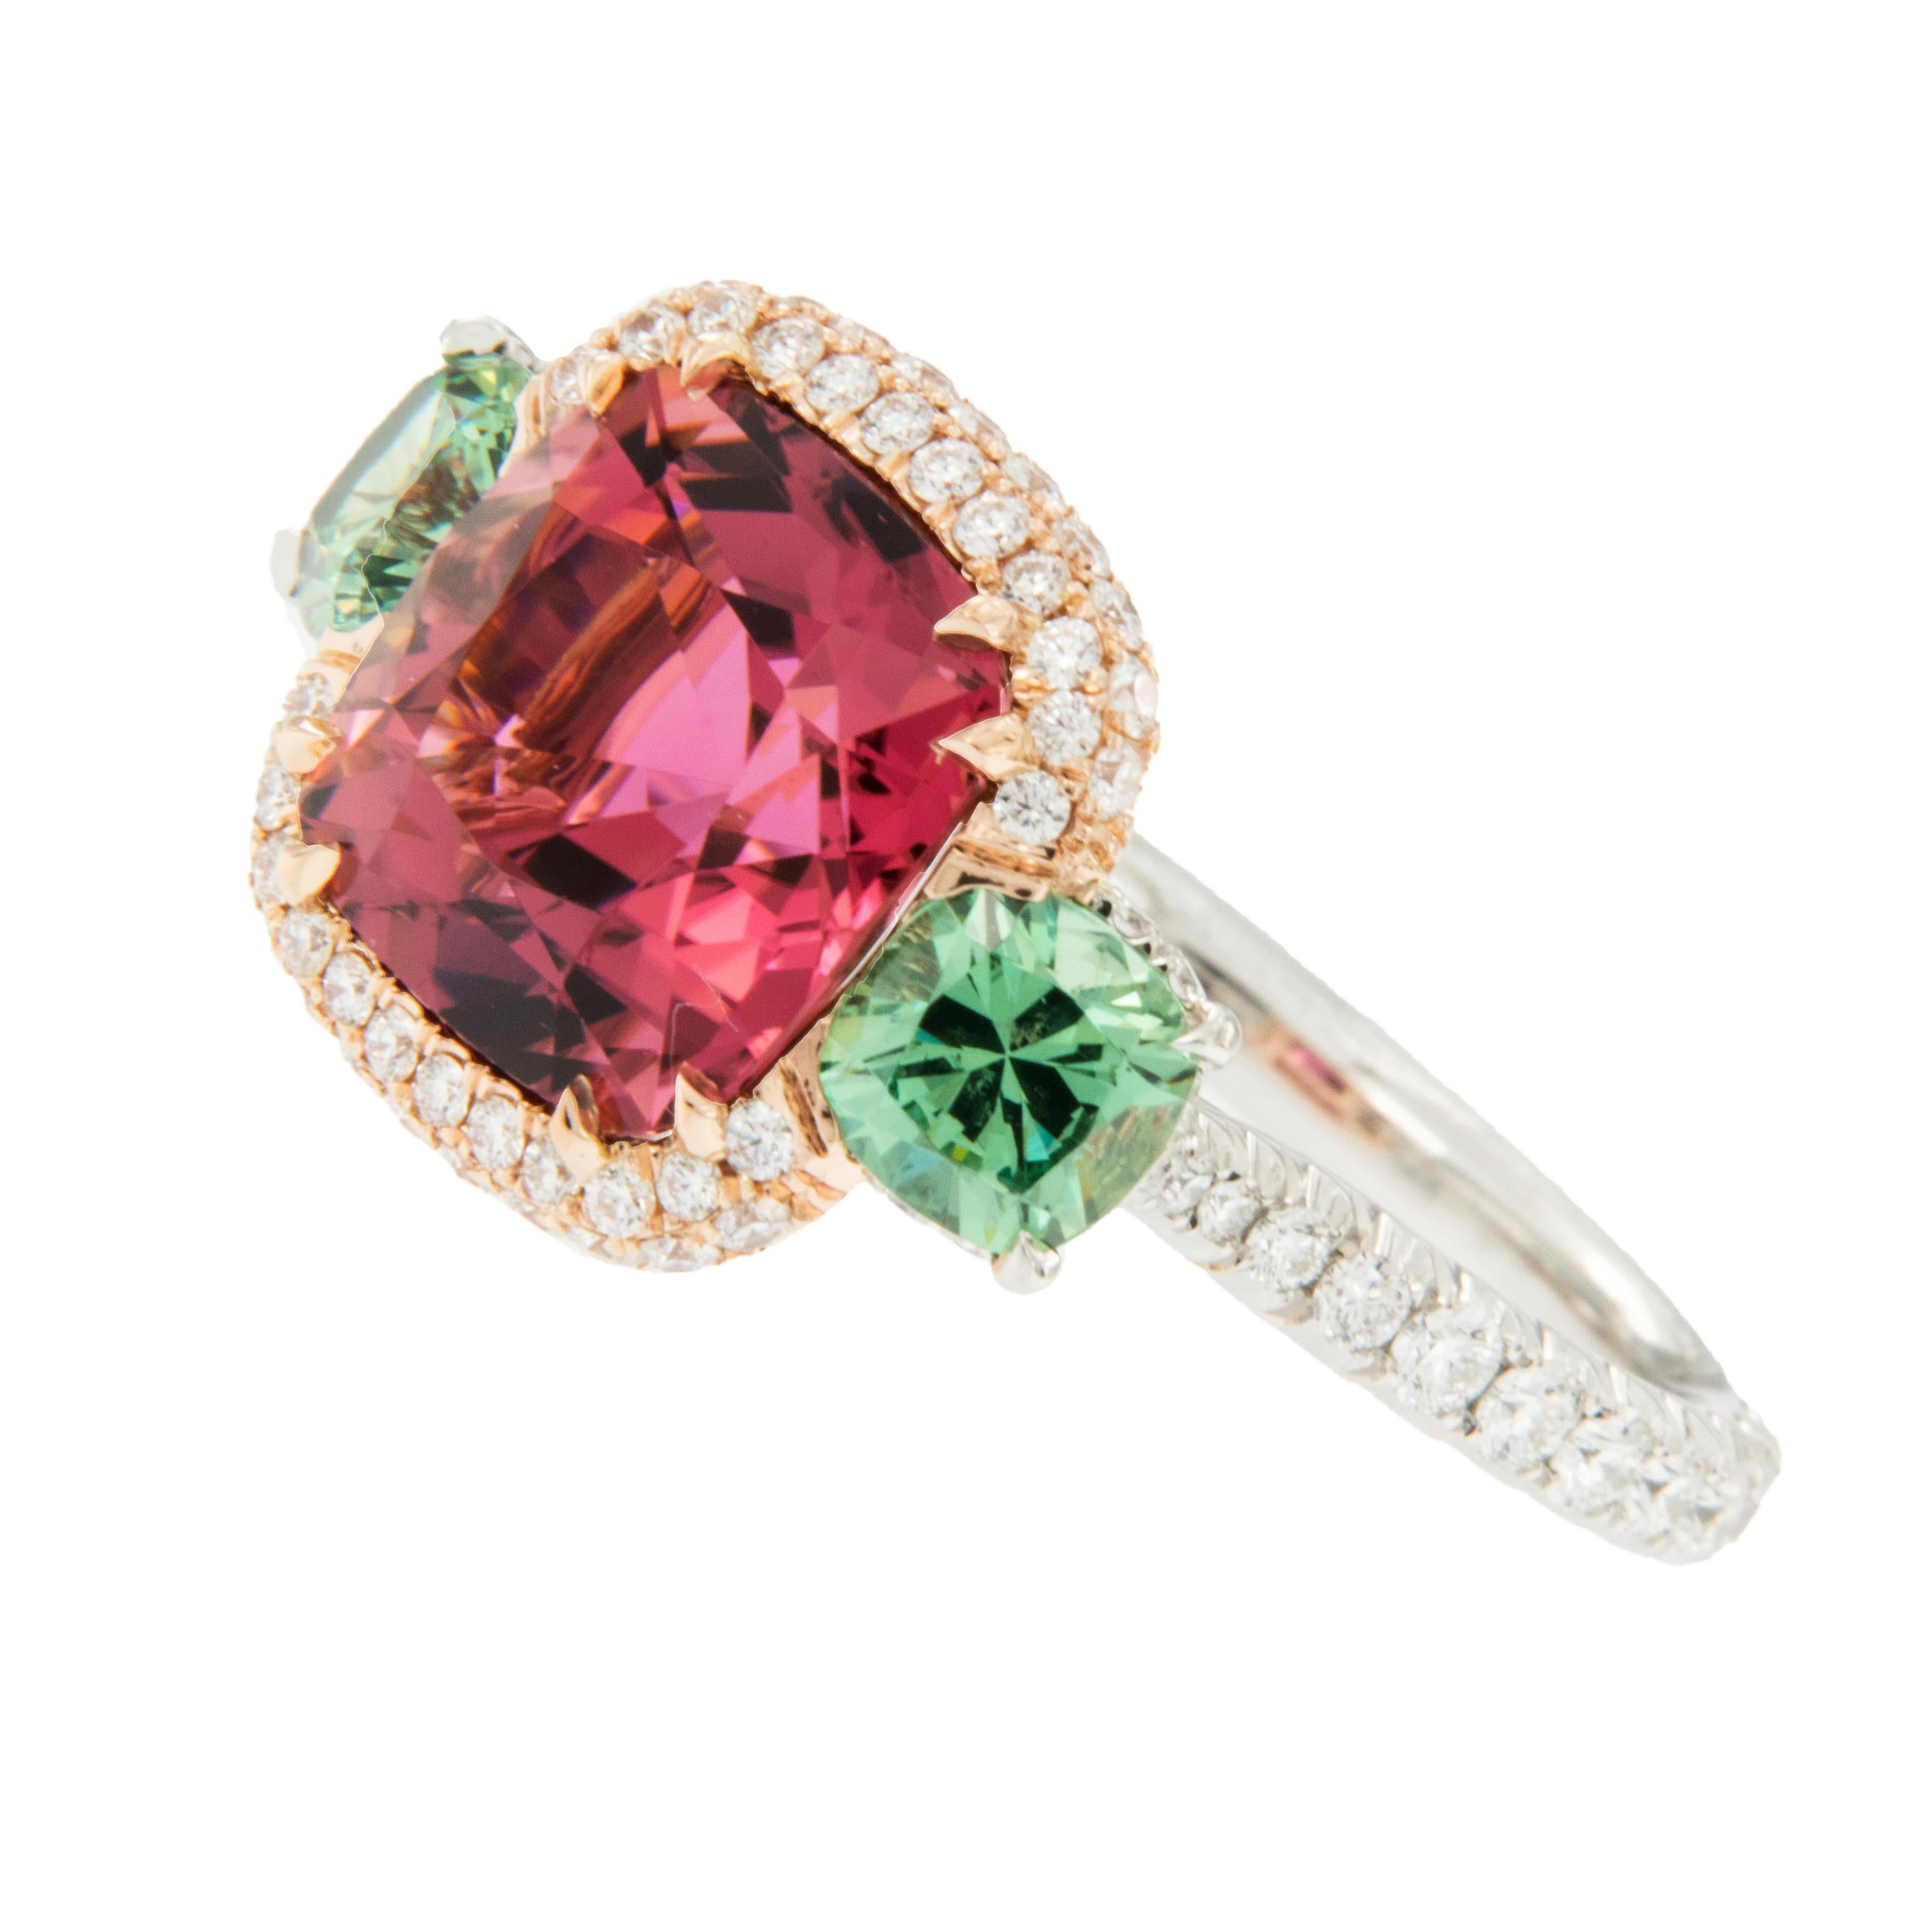 Made in New York & known for his superb, finest quality gems & craftsmanship, this exceptional ring showcases a lovely hued Rubelite set in 18 karat rose gold diamond halo, flanked by 2 natural, unenhanced Demantoid Garnets = 1.28 Cttw. Demantoid's